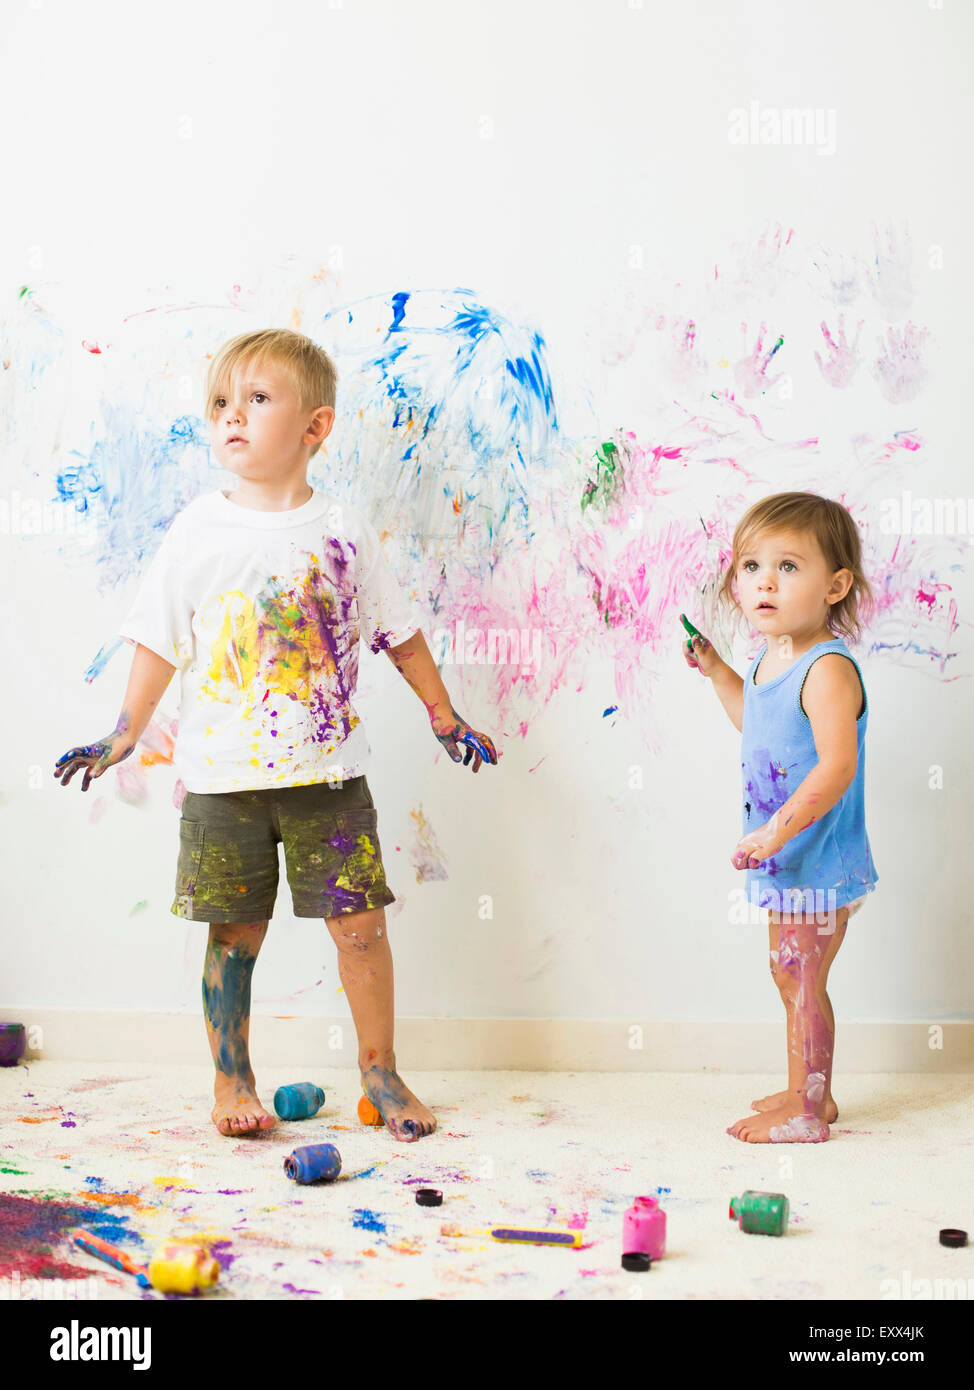 Children (2-3) painting on wall Stock Photo